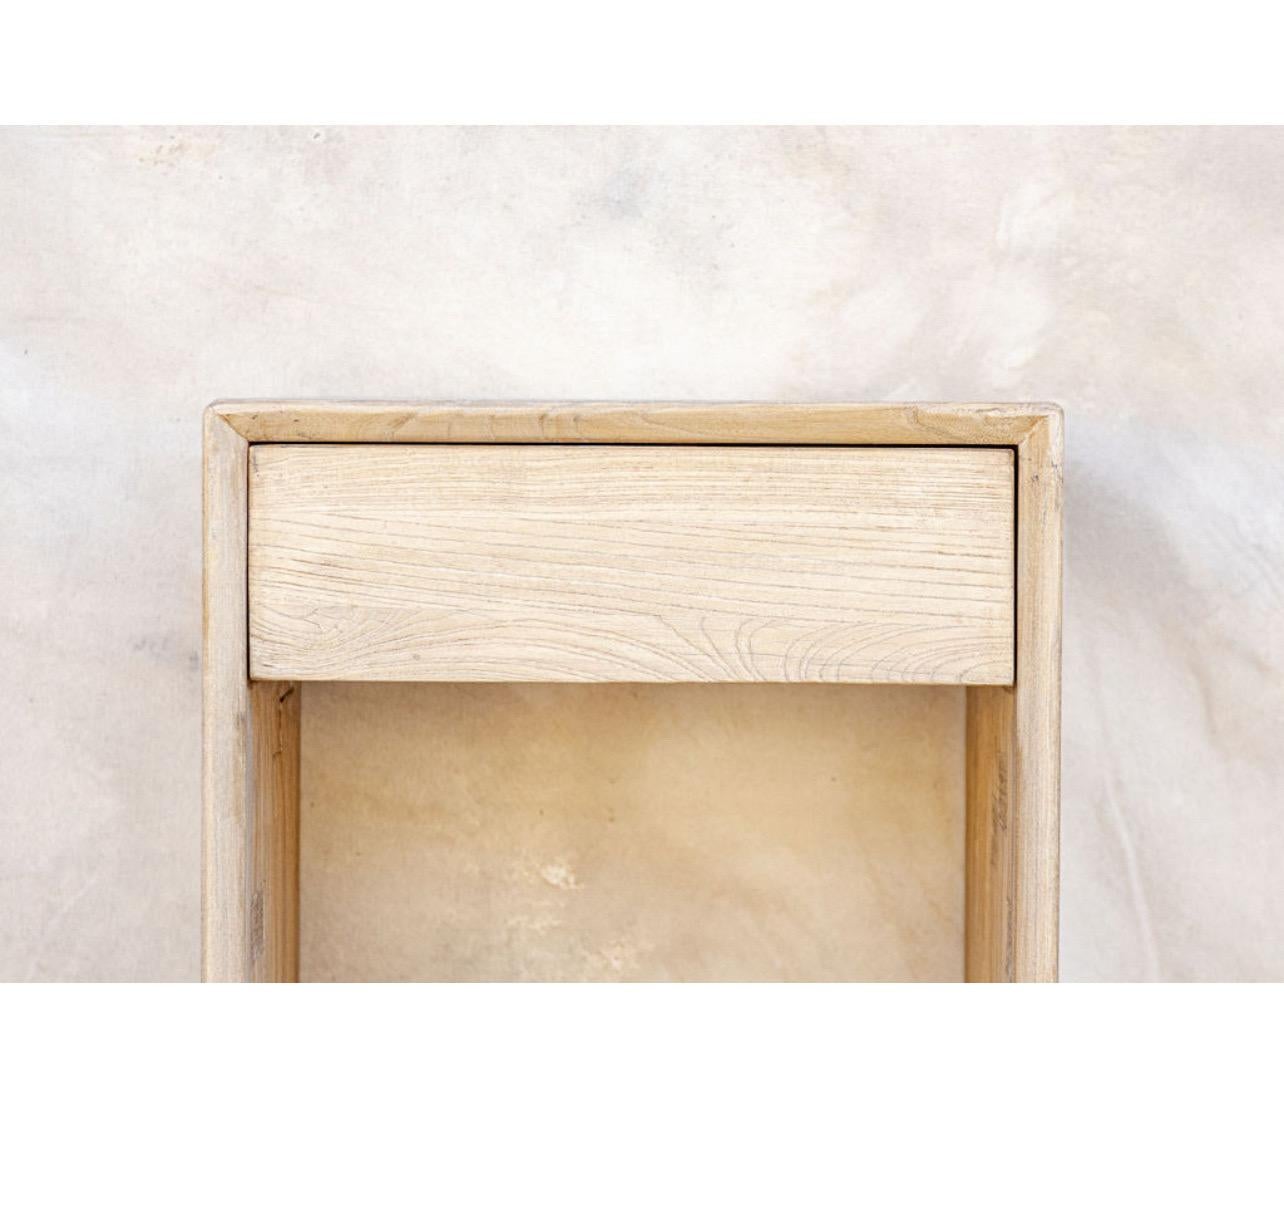 Crafted with vintage elm wood sourced throughout Europe and Asia. We love this piece with it’s minimalist drawer design and natural wood tones. 